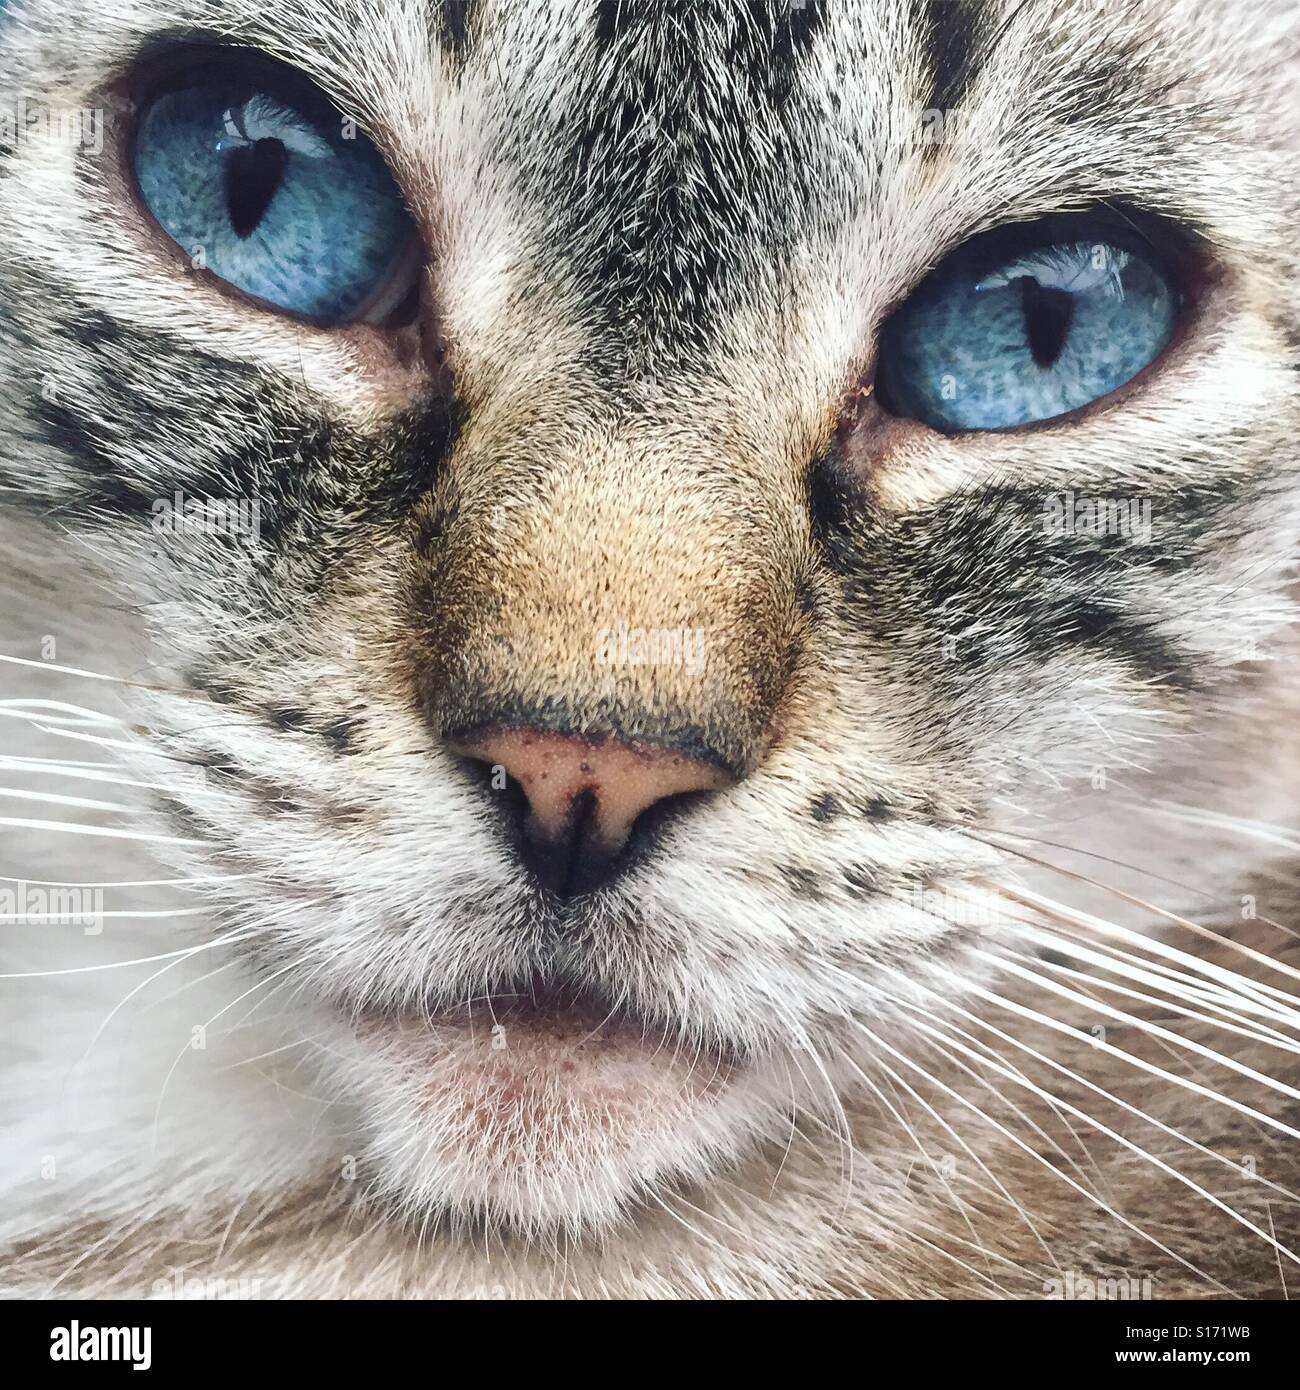 Beautiful cat face with blue eyes Stock Photo - Alamy